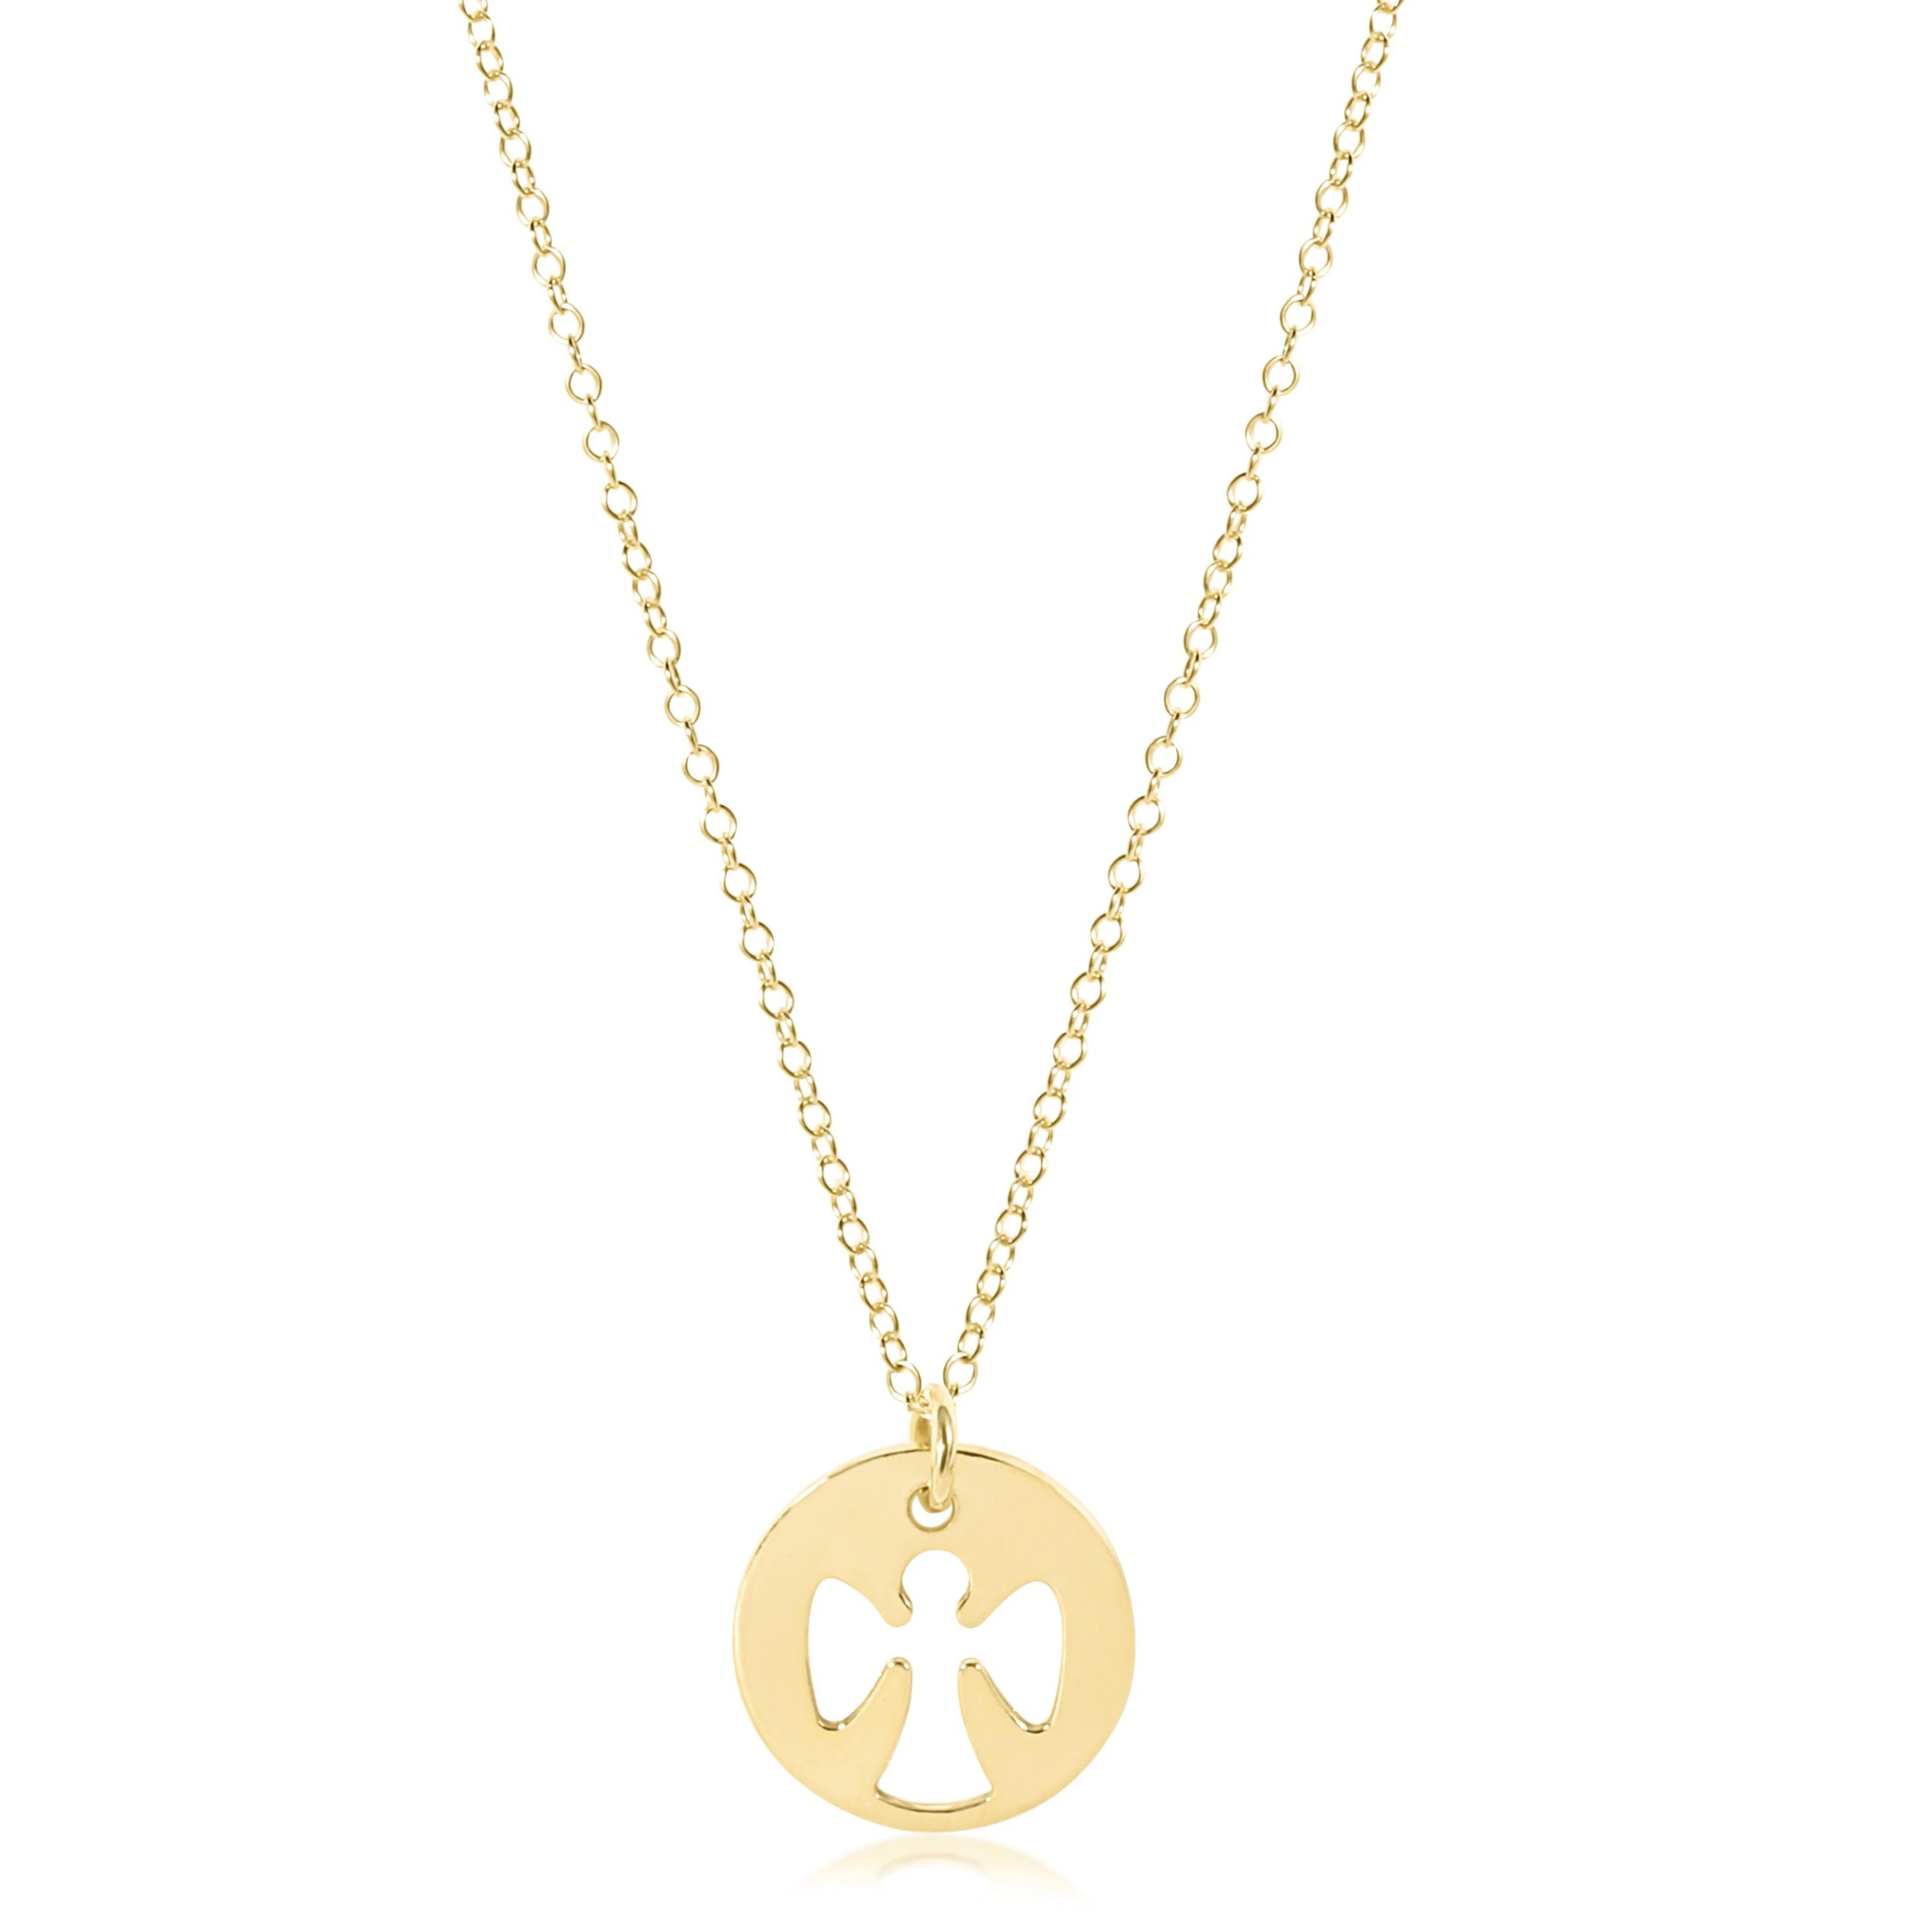 16 necklace gold - guardian angel gold disc